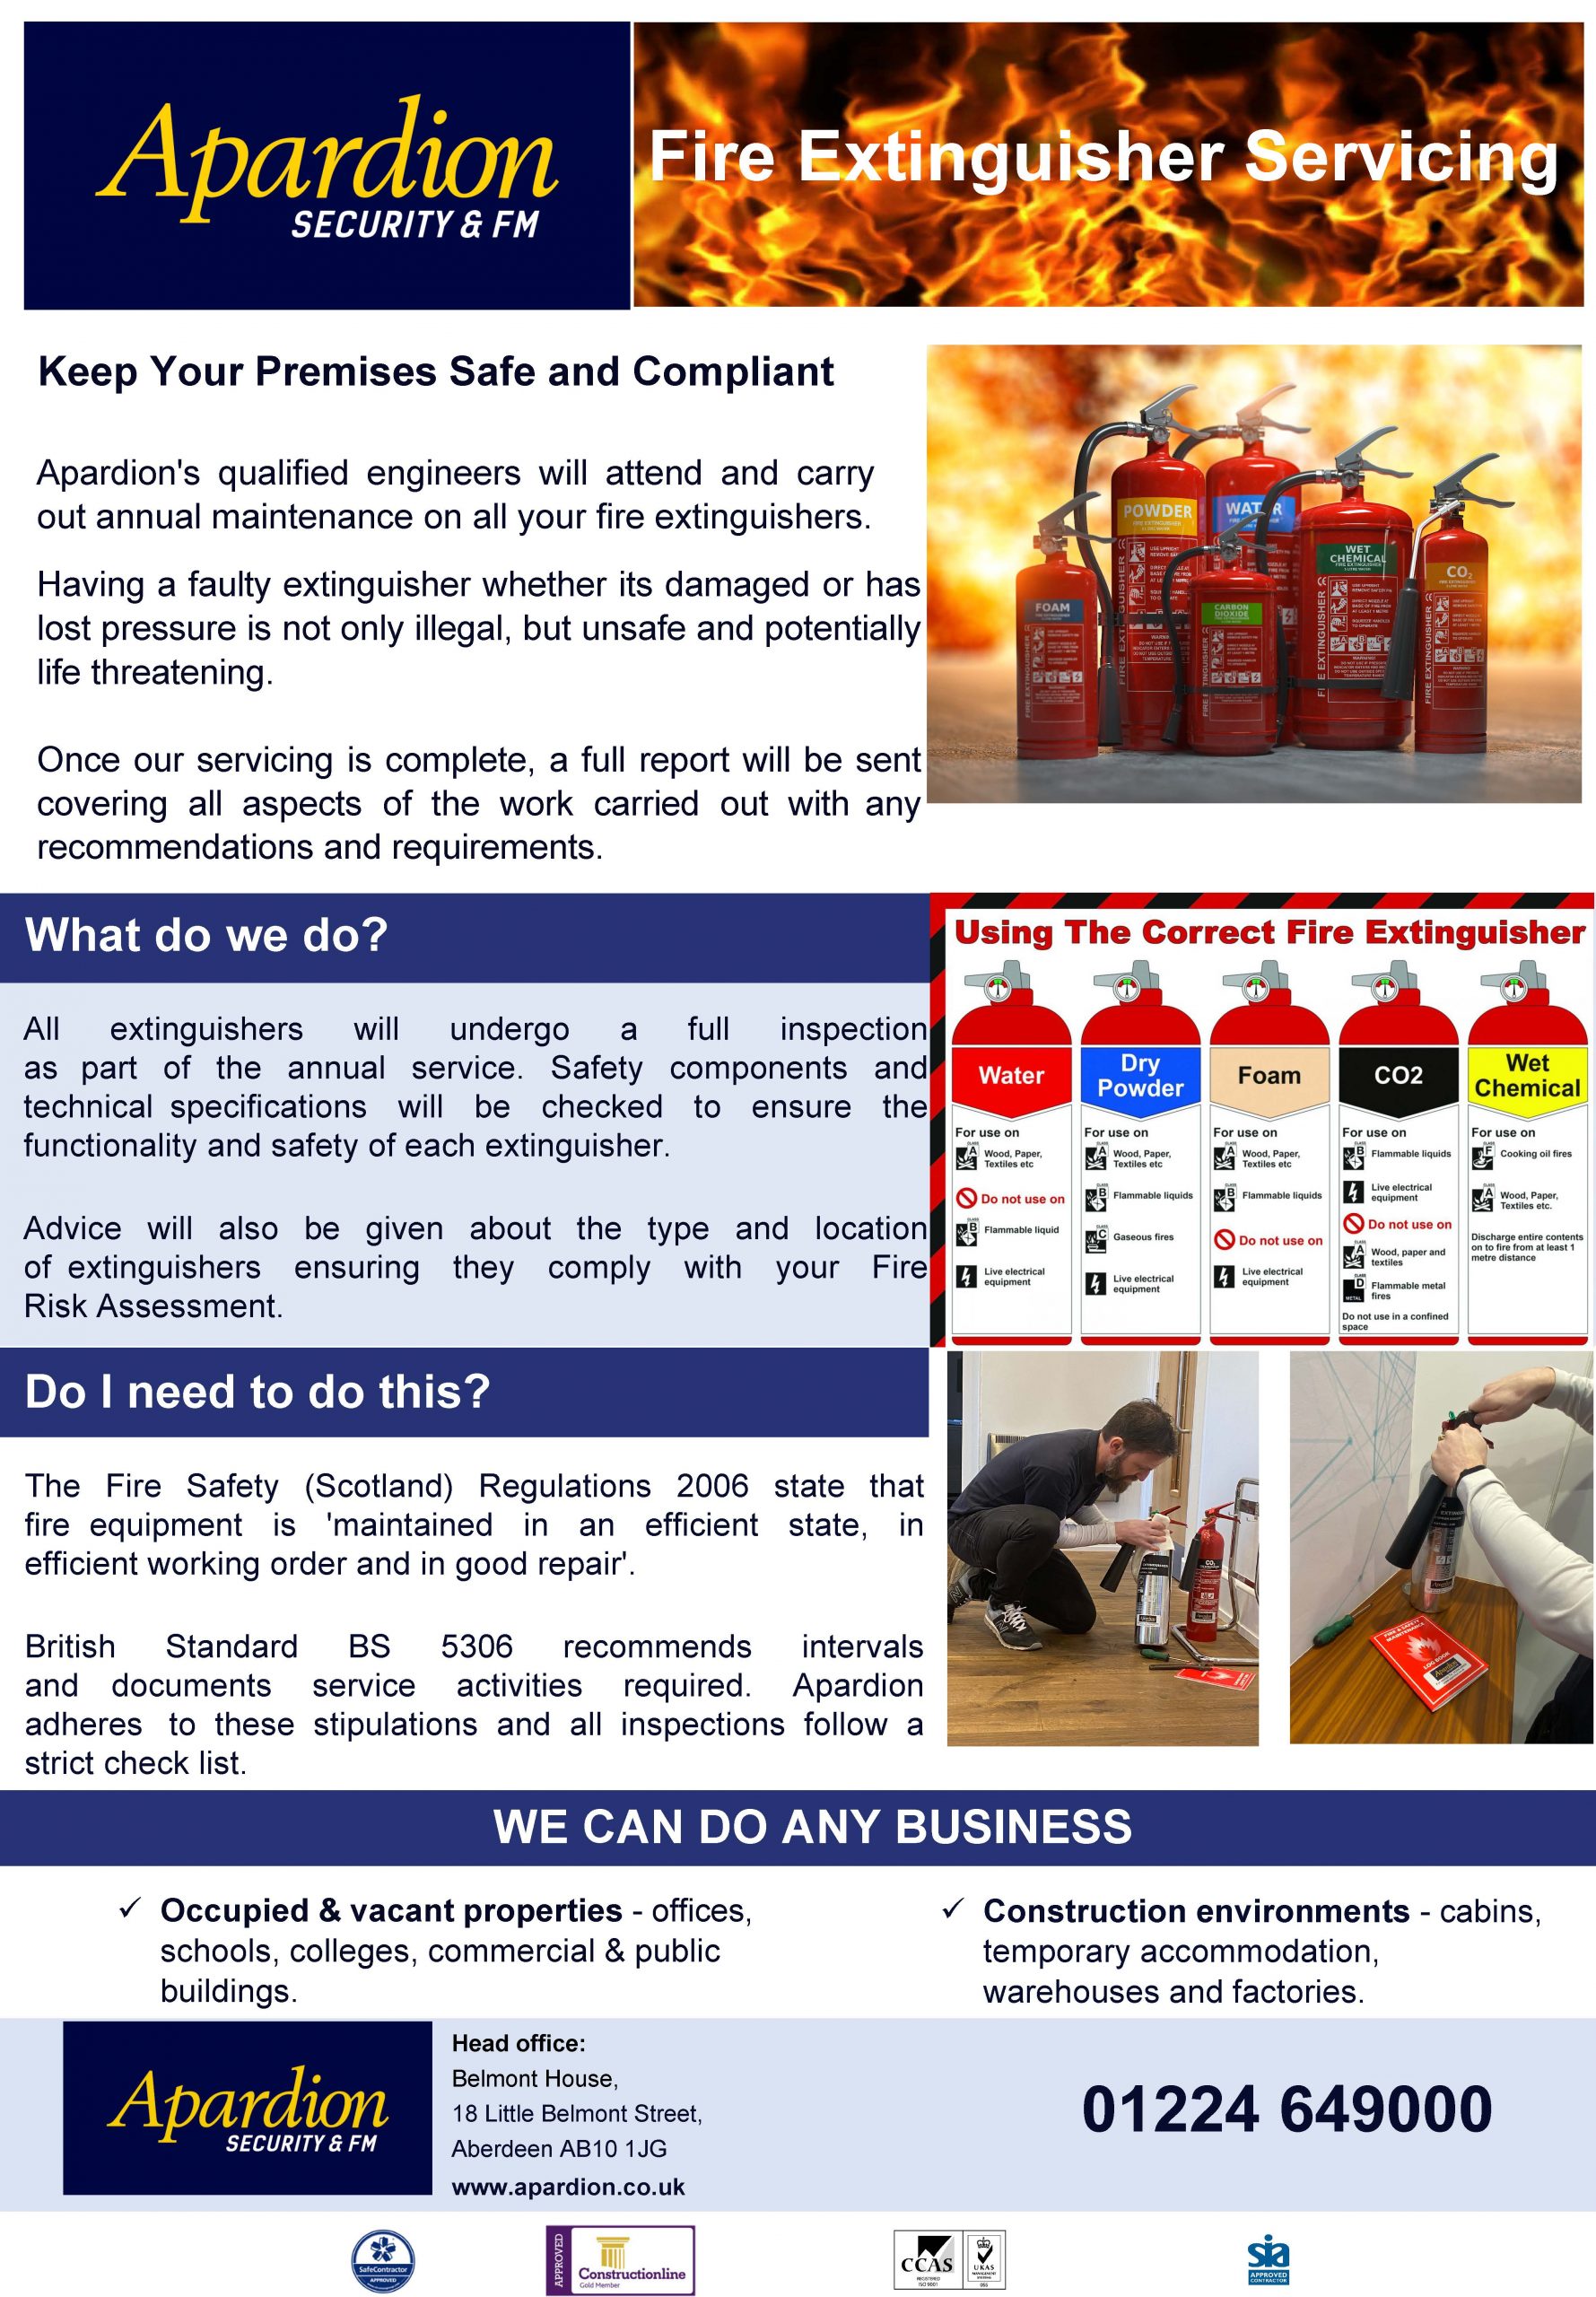 Servicing Portable Fire Extinguishers